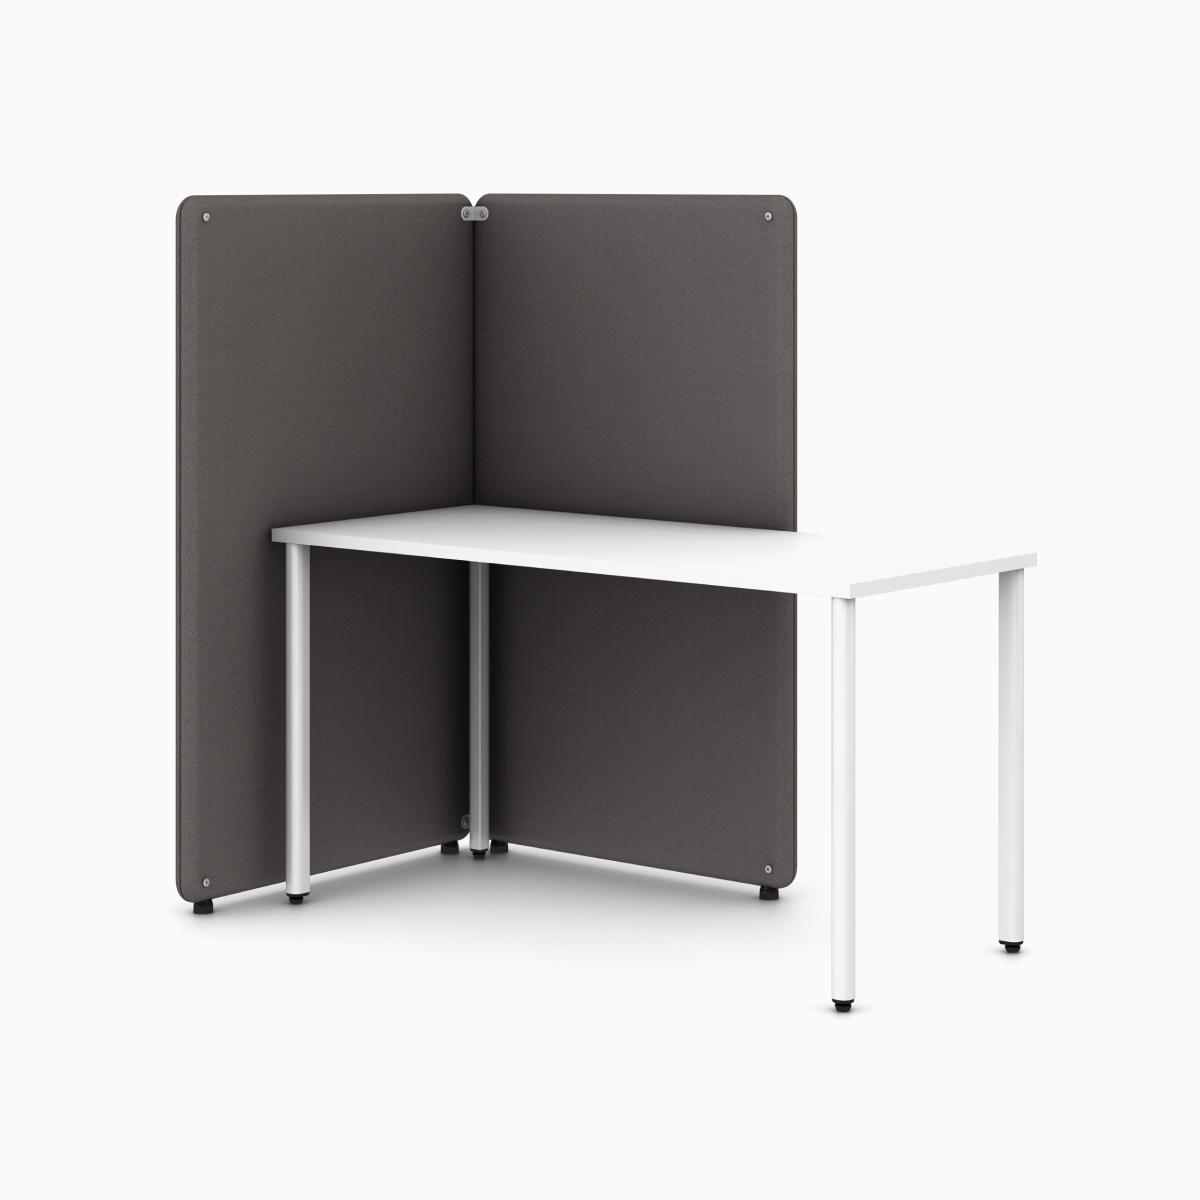 Two grey Bound Freestanding Screens around a white OE1 Rectangular Table, viewed from an angle.